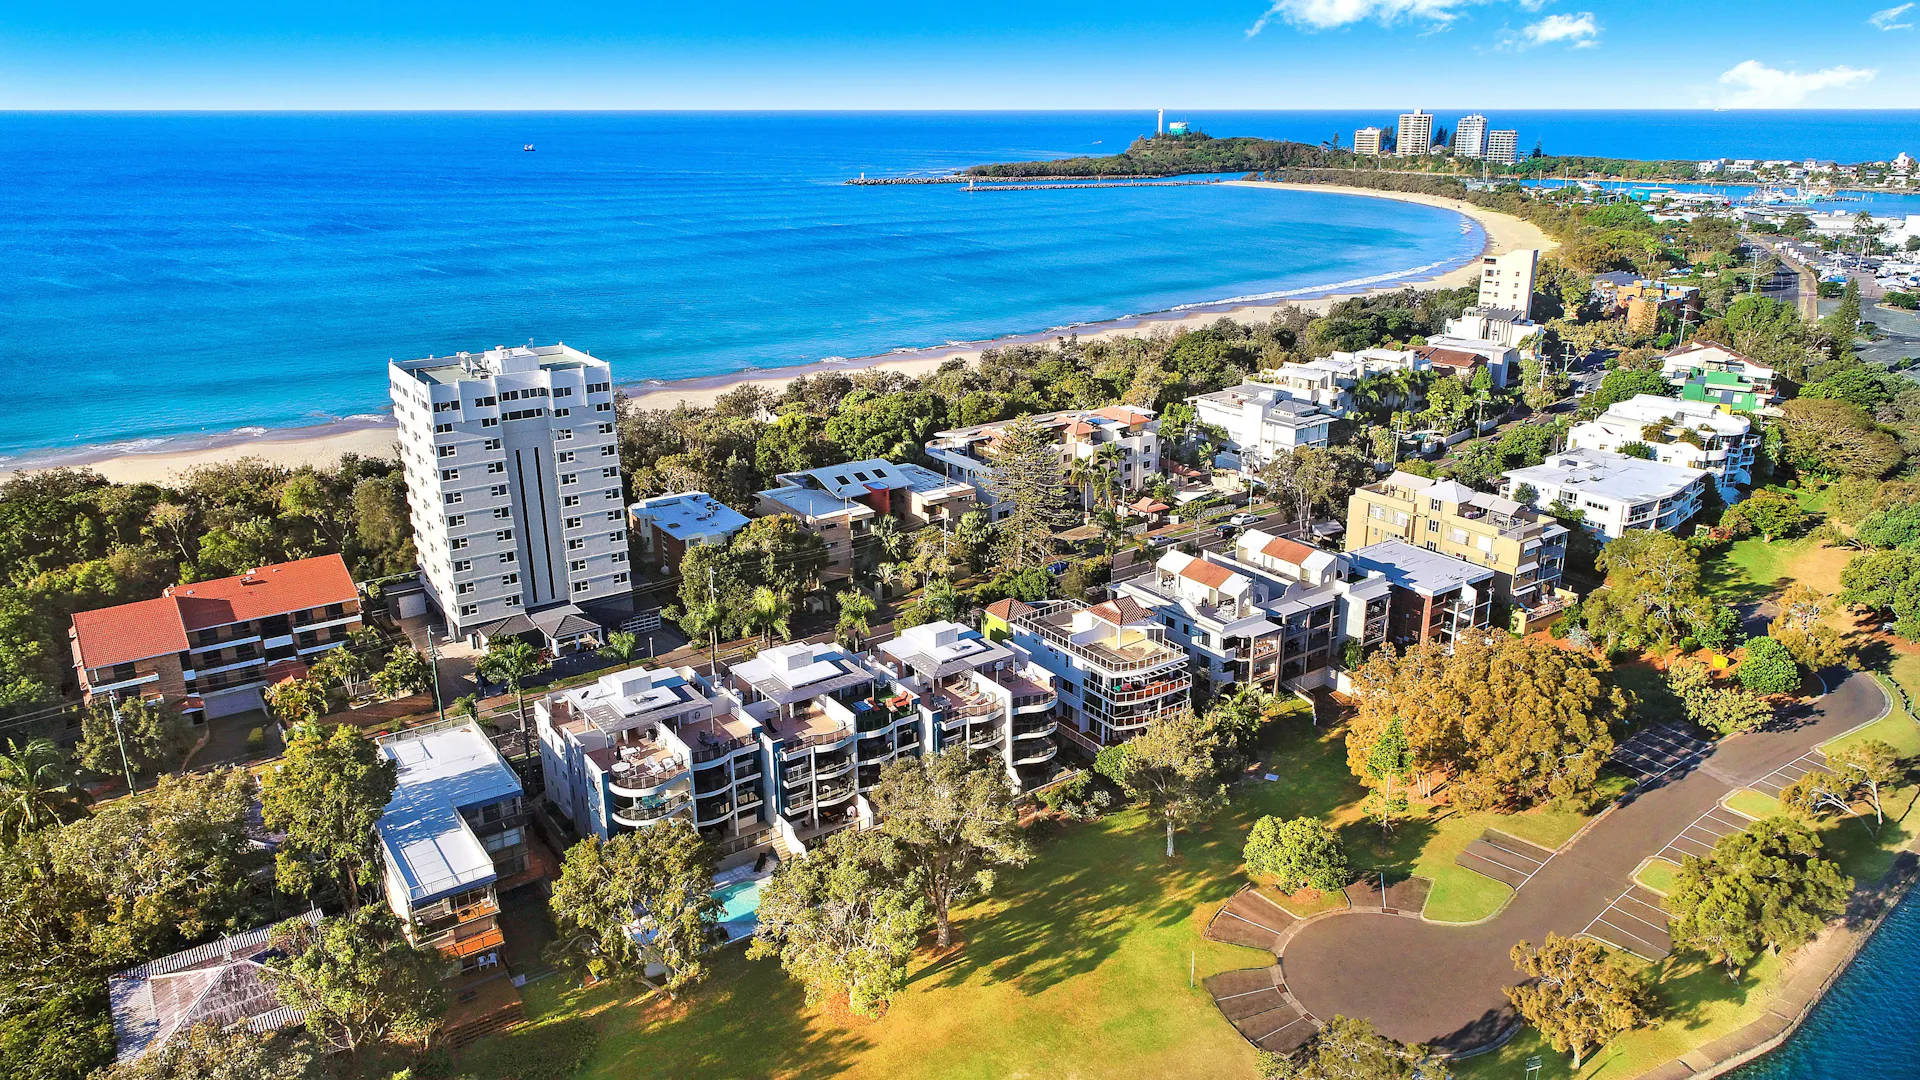 Just across the road to the amazing Mooloolaba Beach